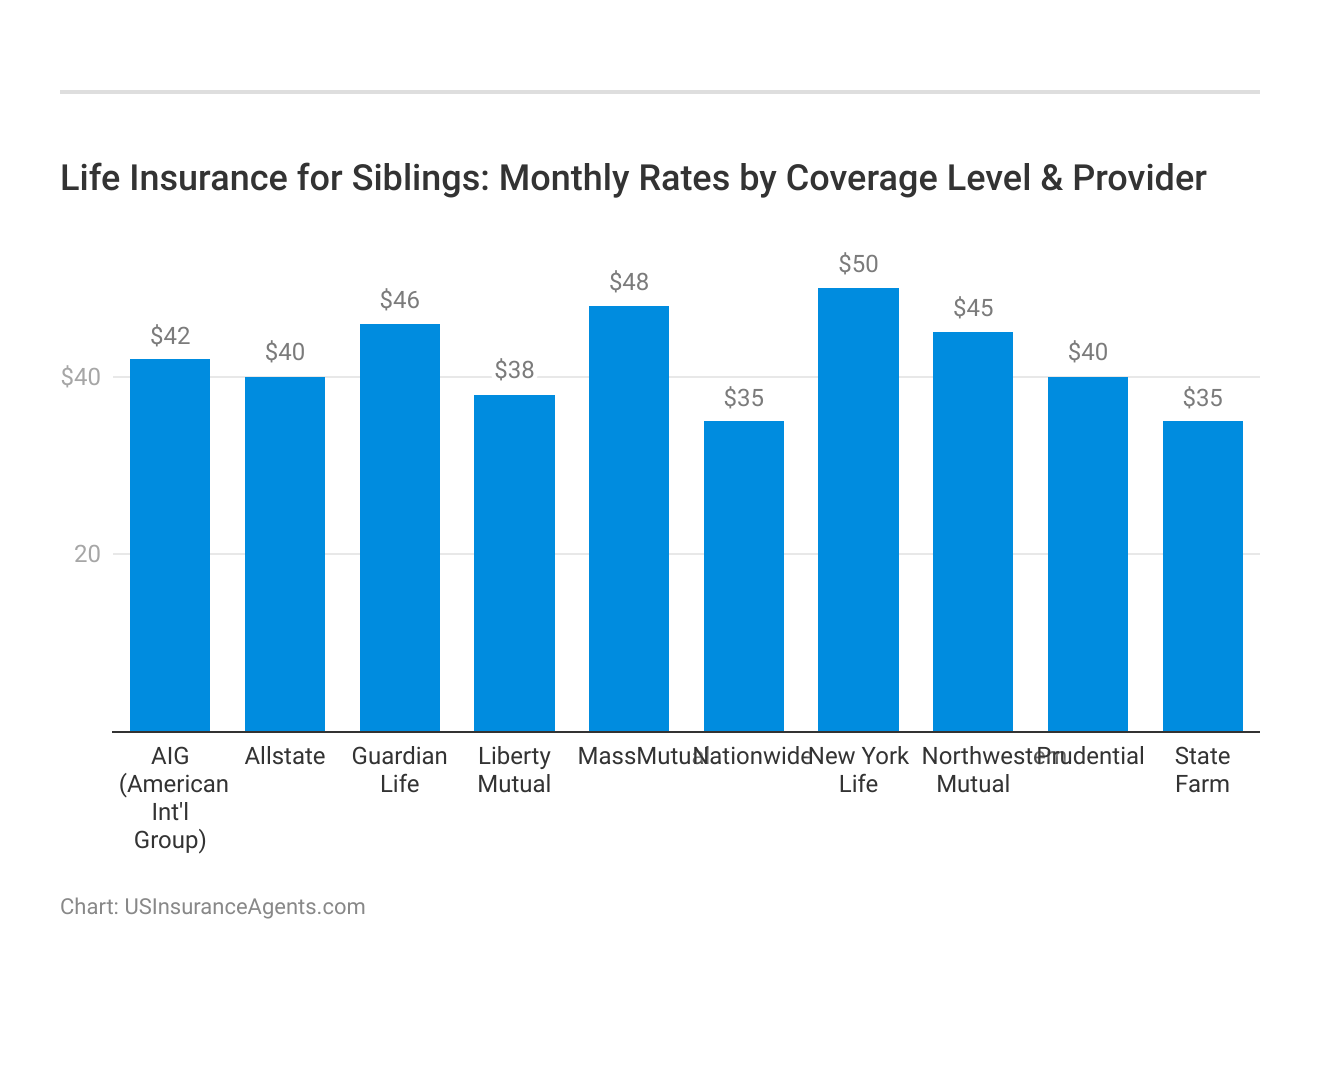 <h3>Life Insurance for Siblings: Monthly Rates by Coverage Level & Provider</h3>